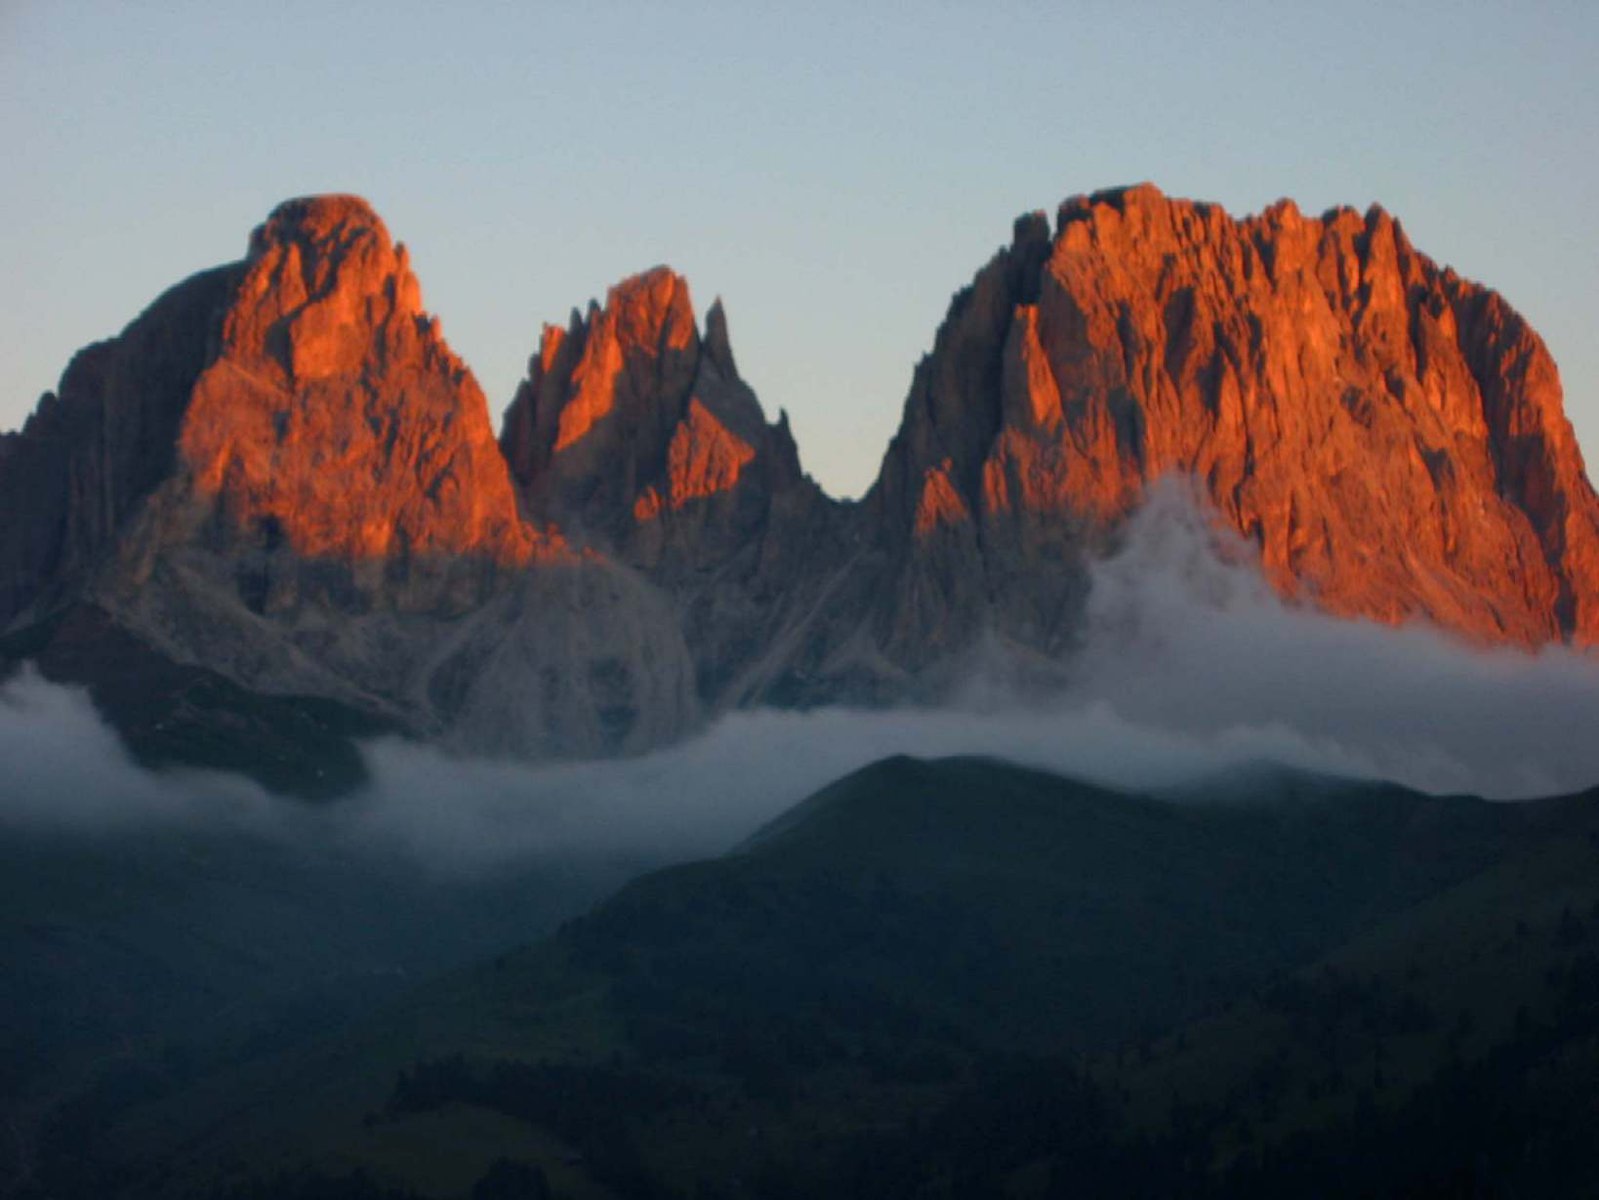 Alpenglow on the Dolomites in Italy